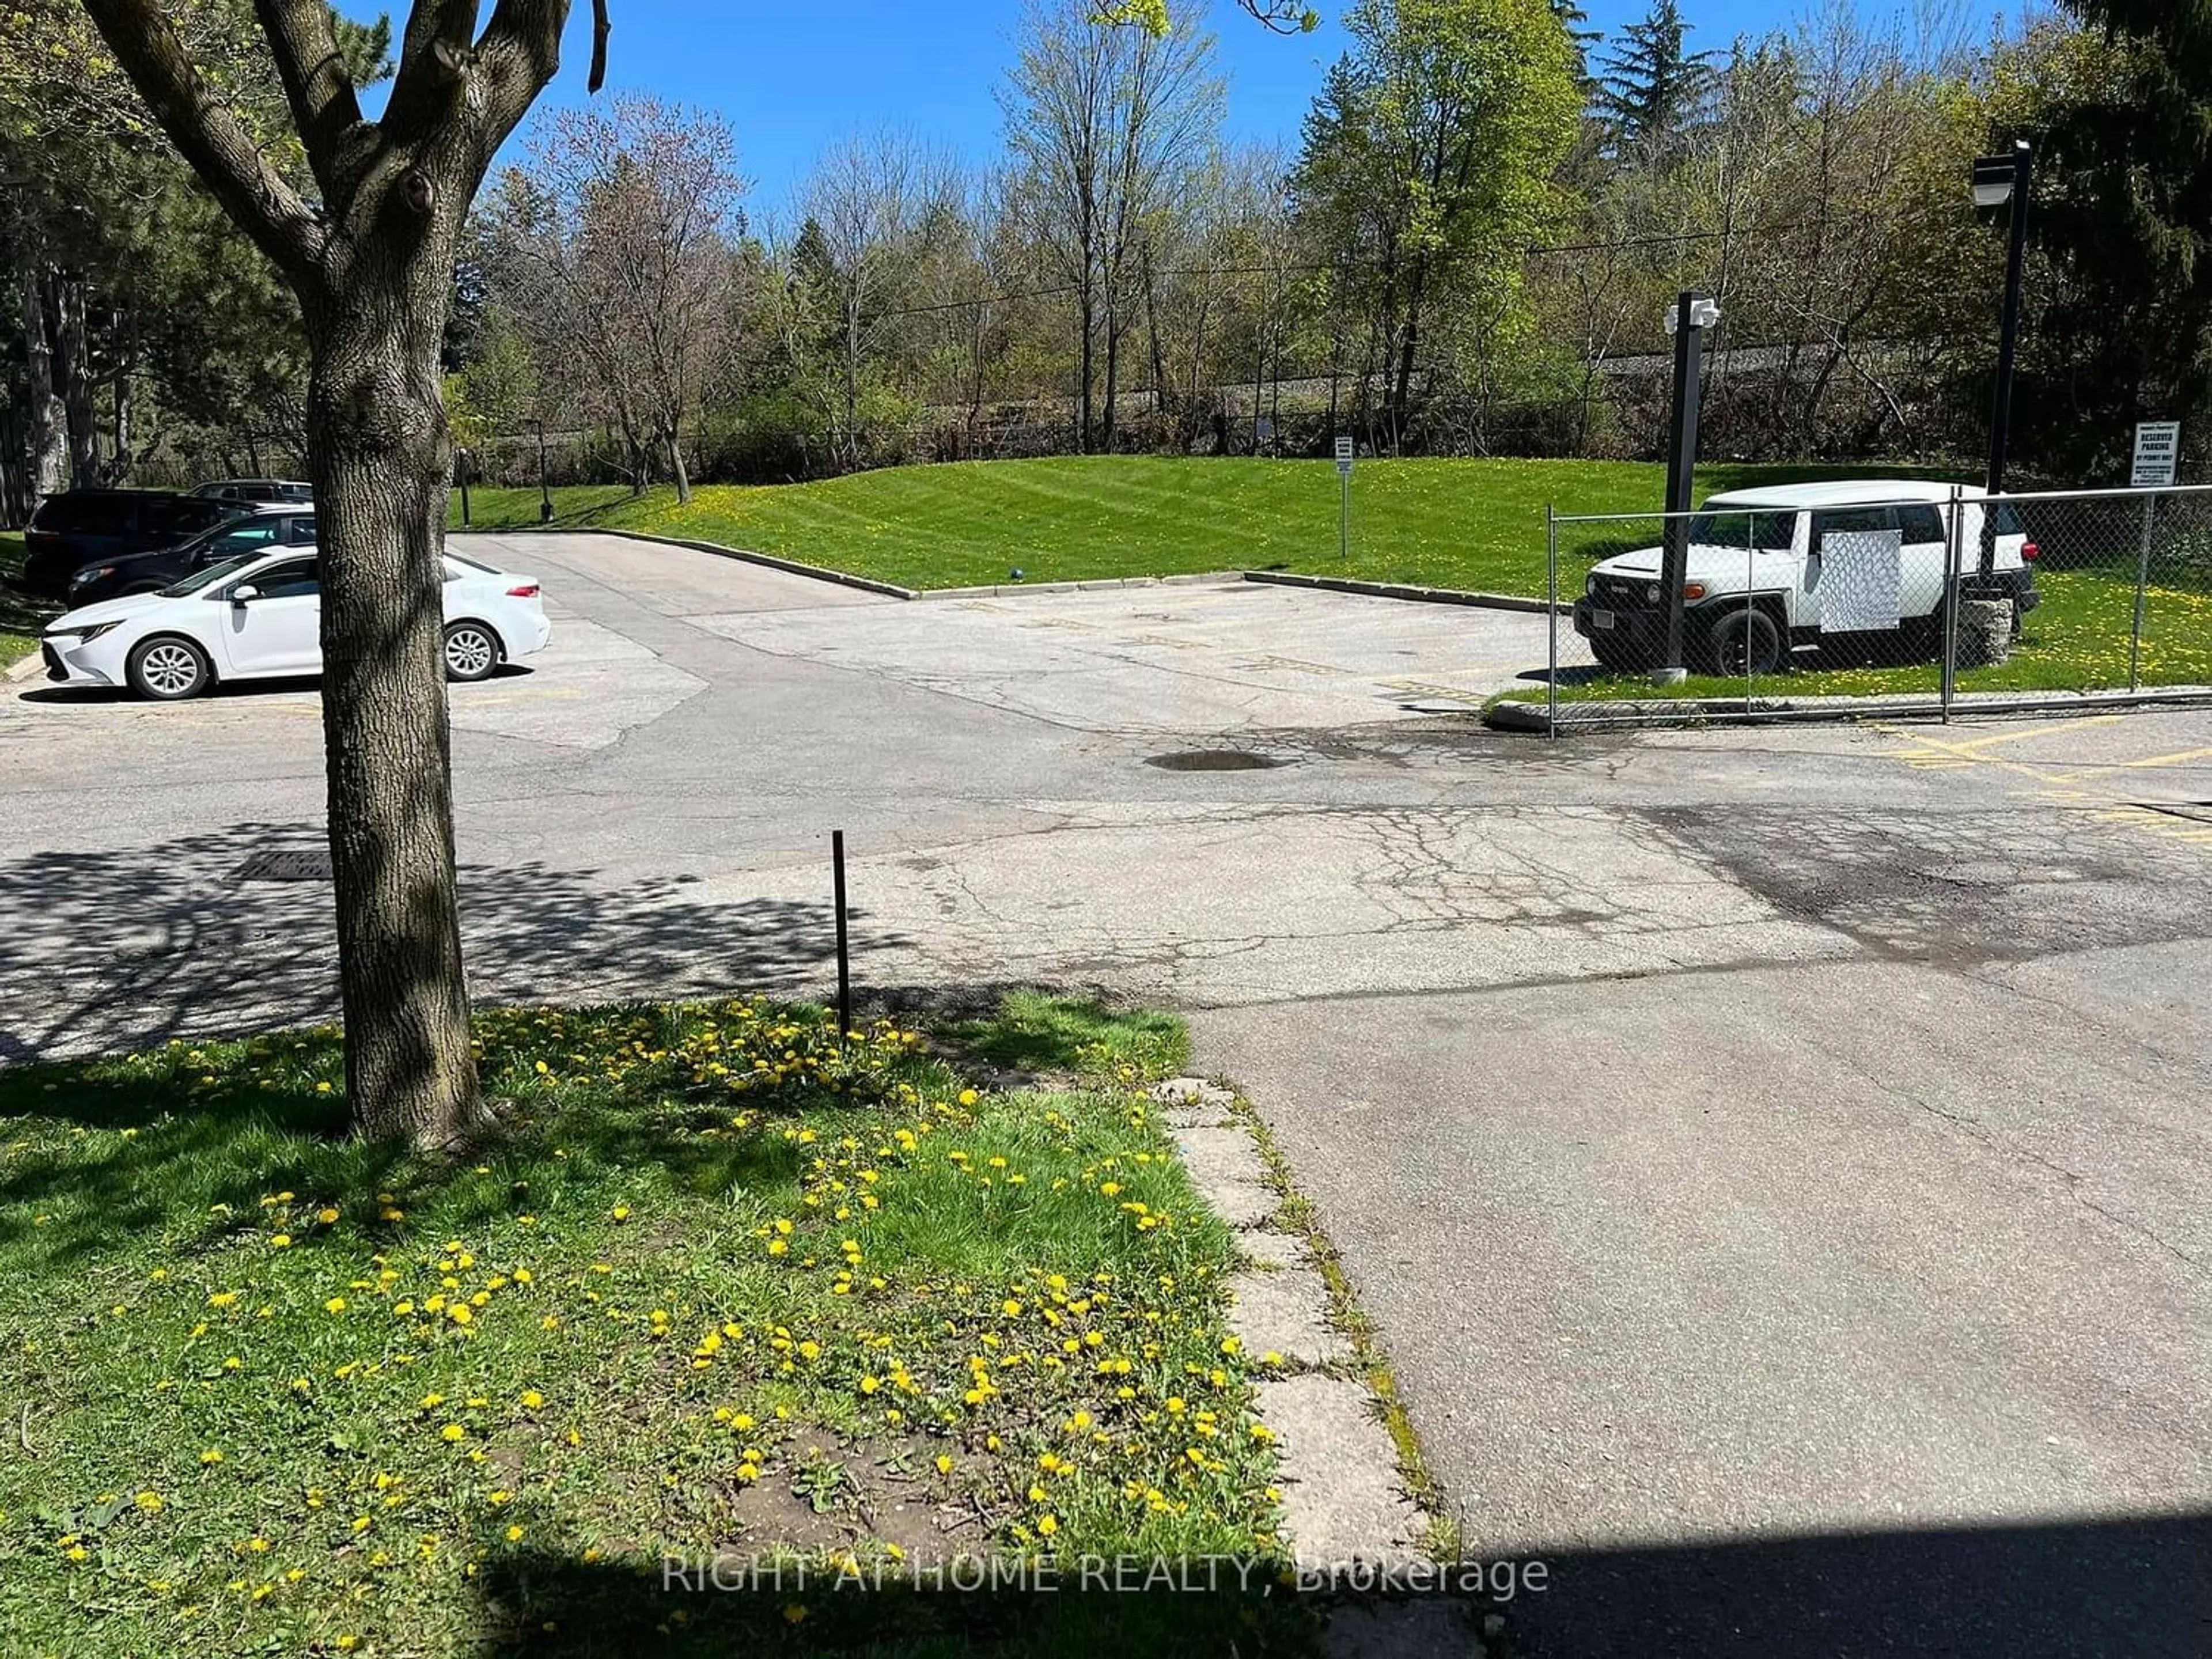 Parking for 400 Mississauga Valley Blvd #44, Mississauga Ontario L5A 3N6